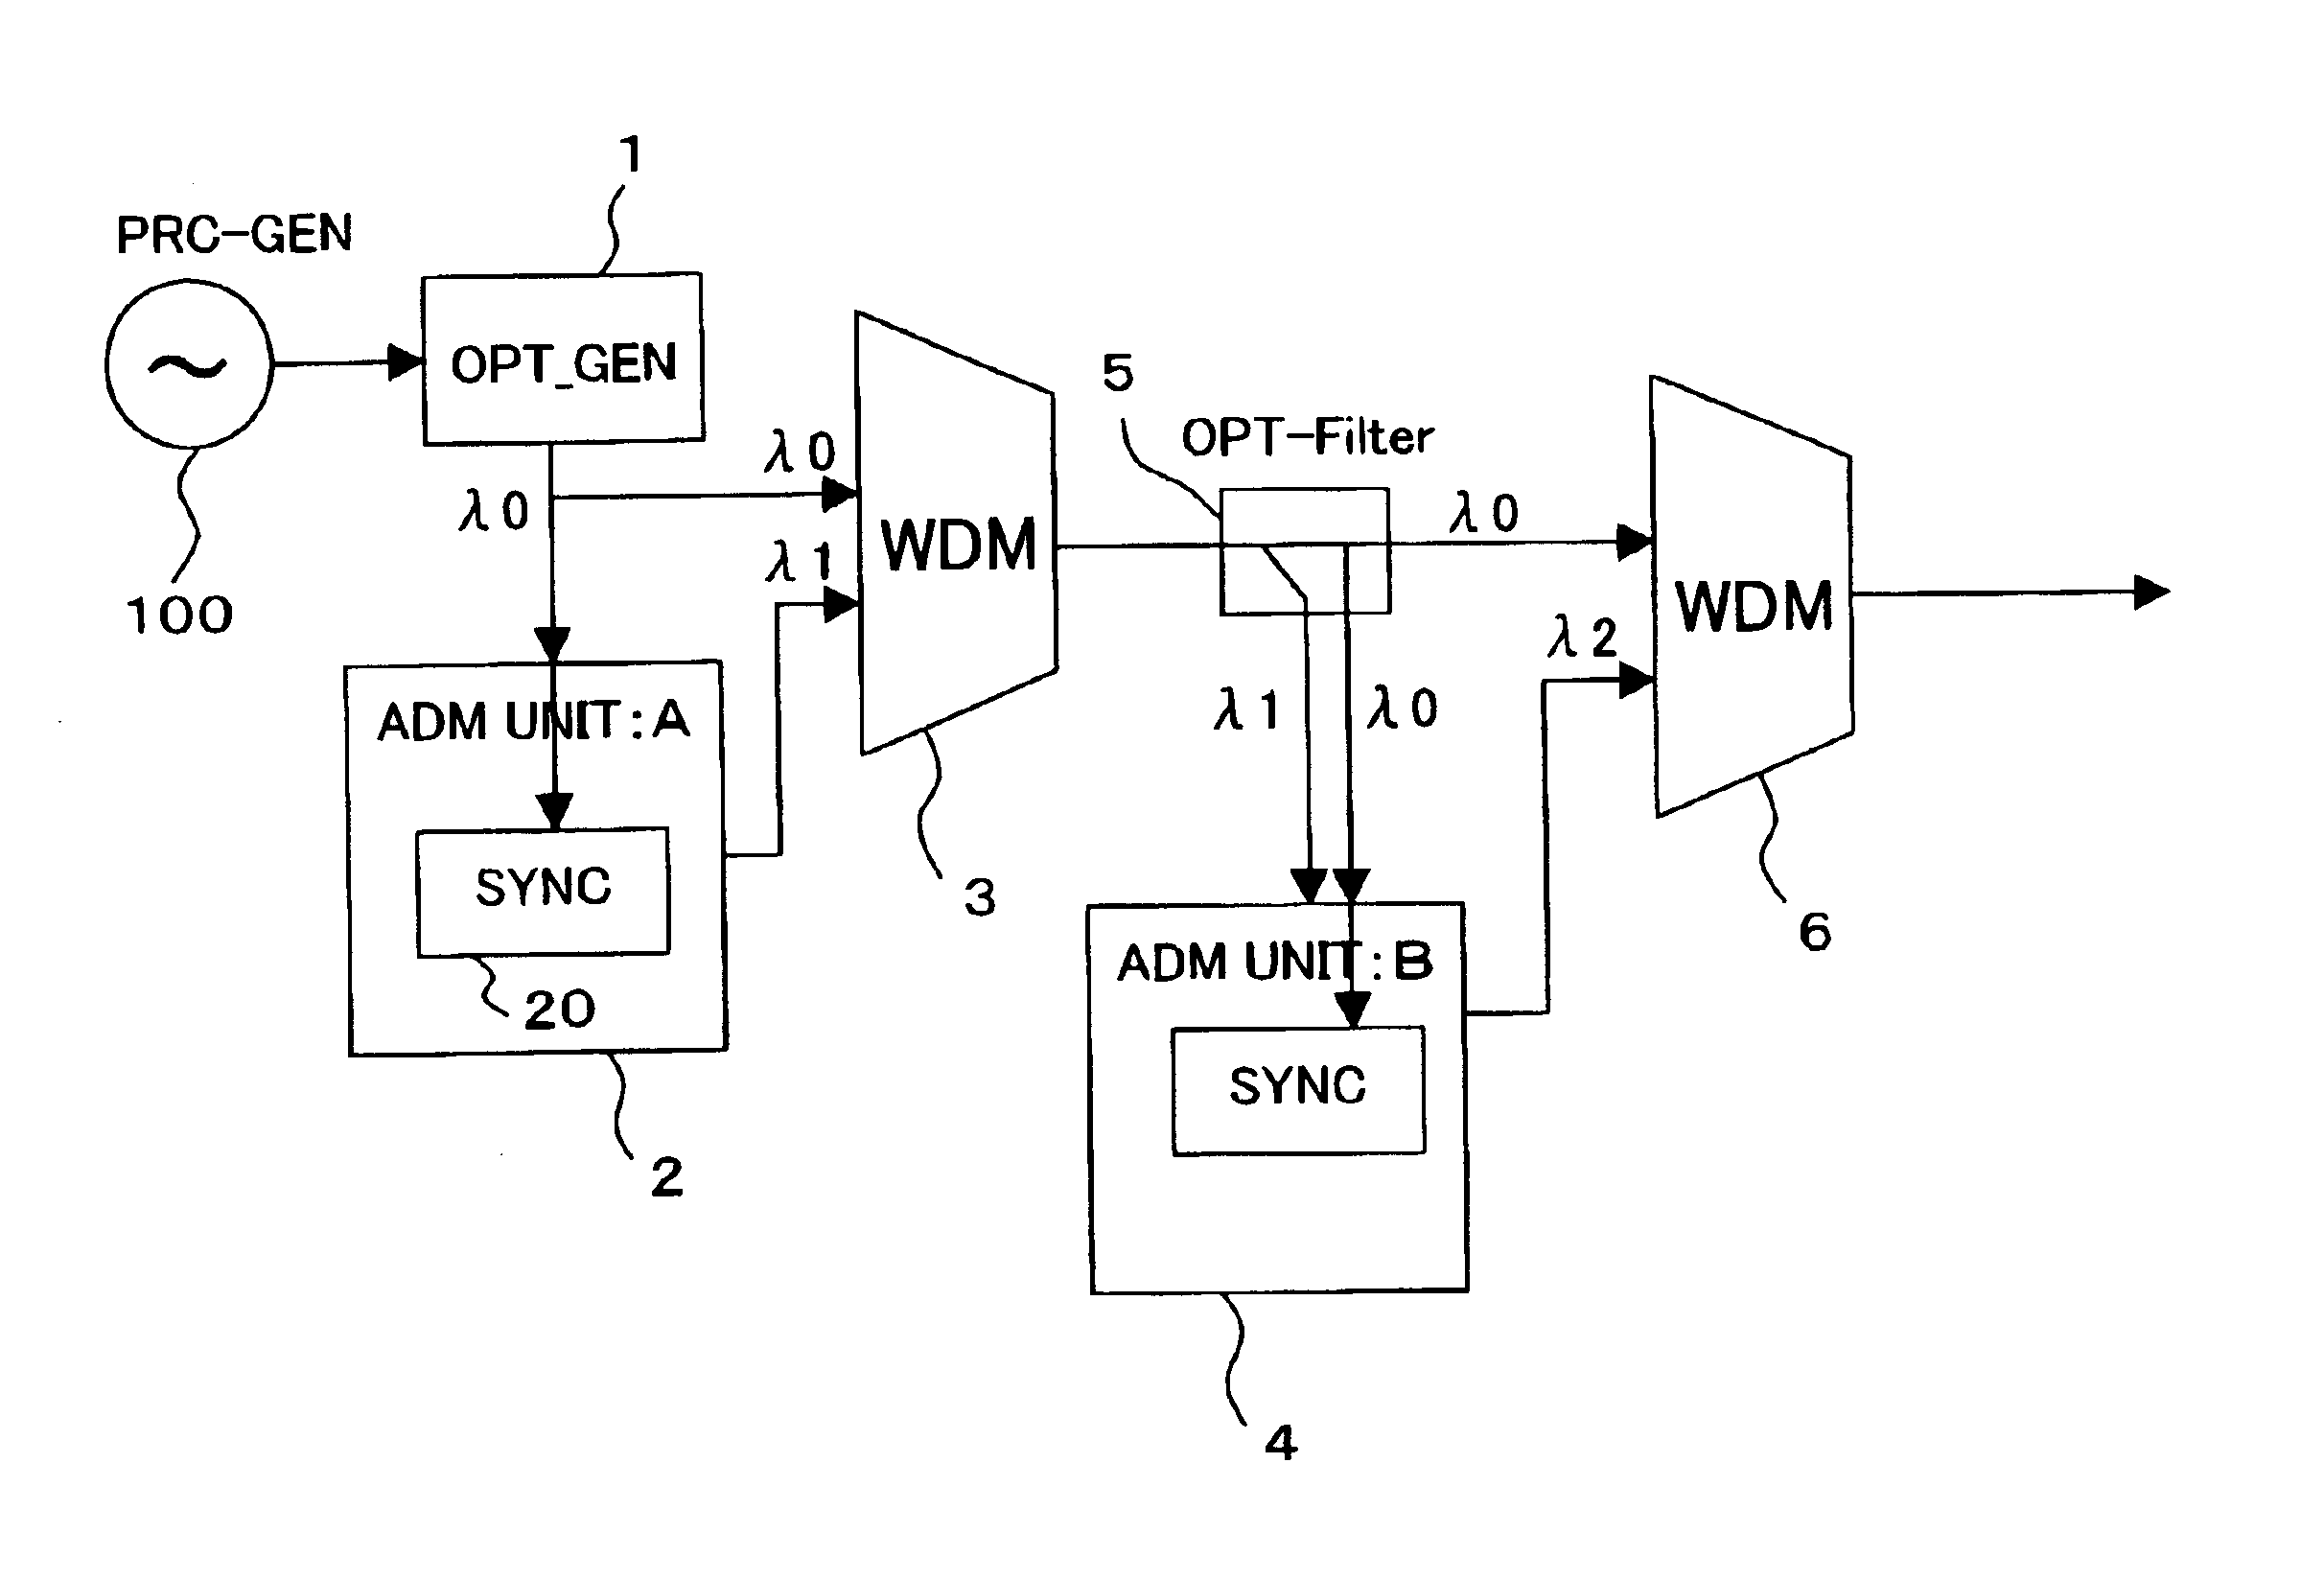 Optical clock signal distribution system in WDM network